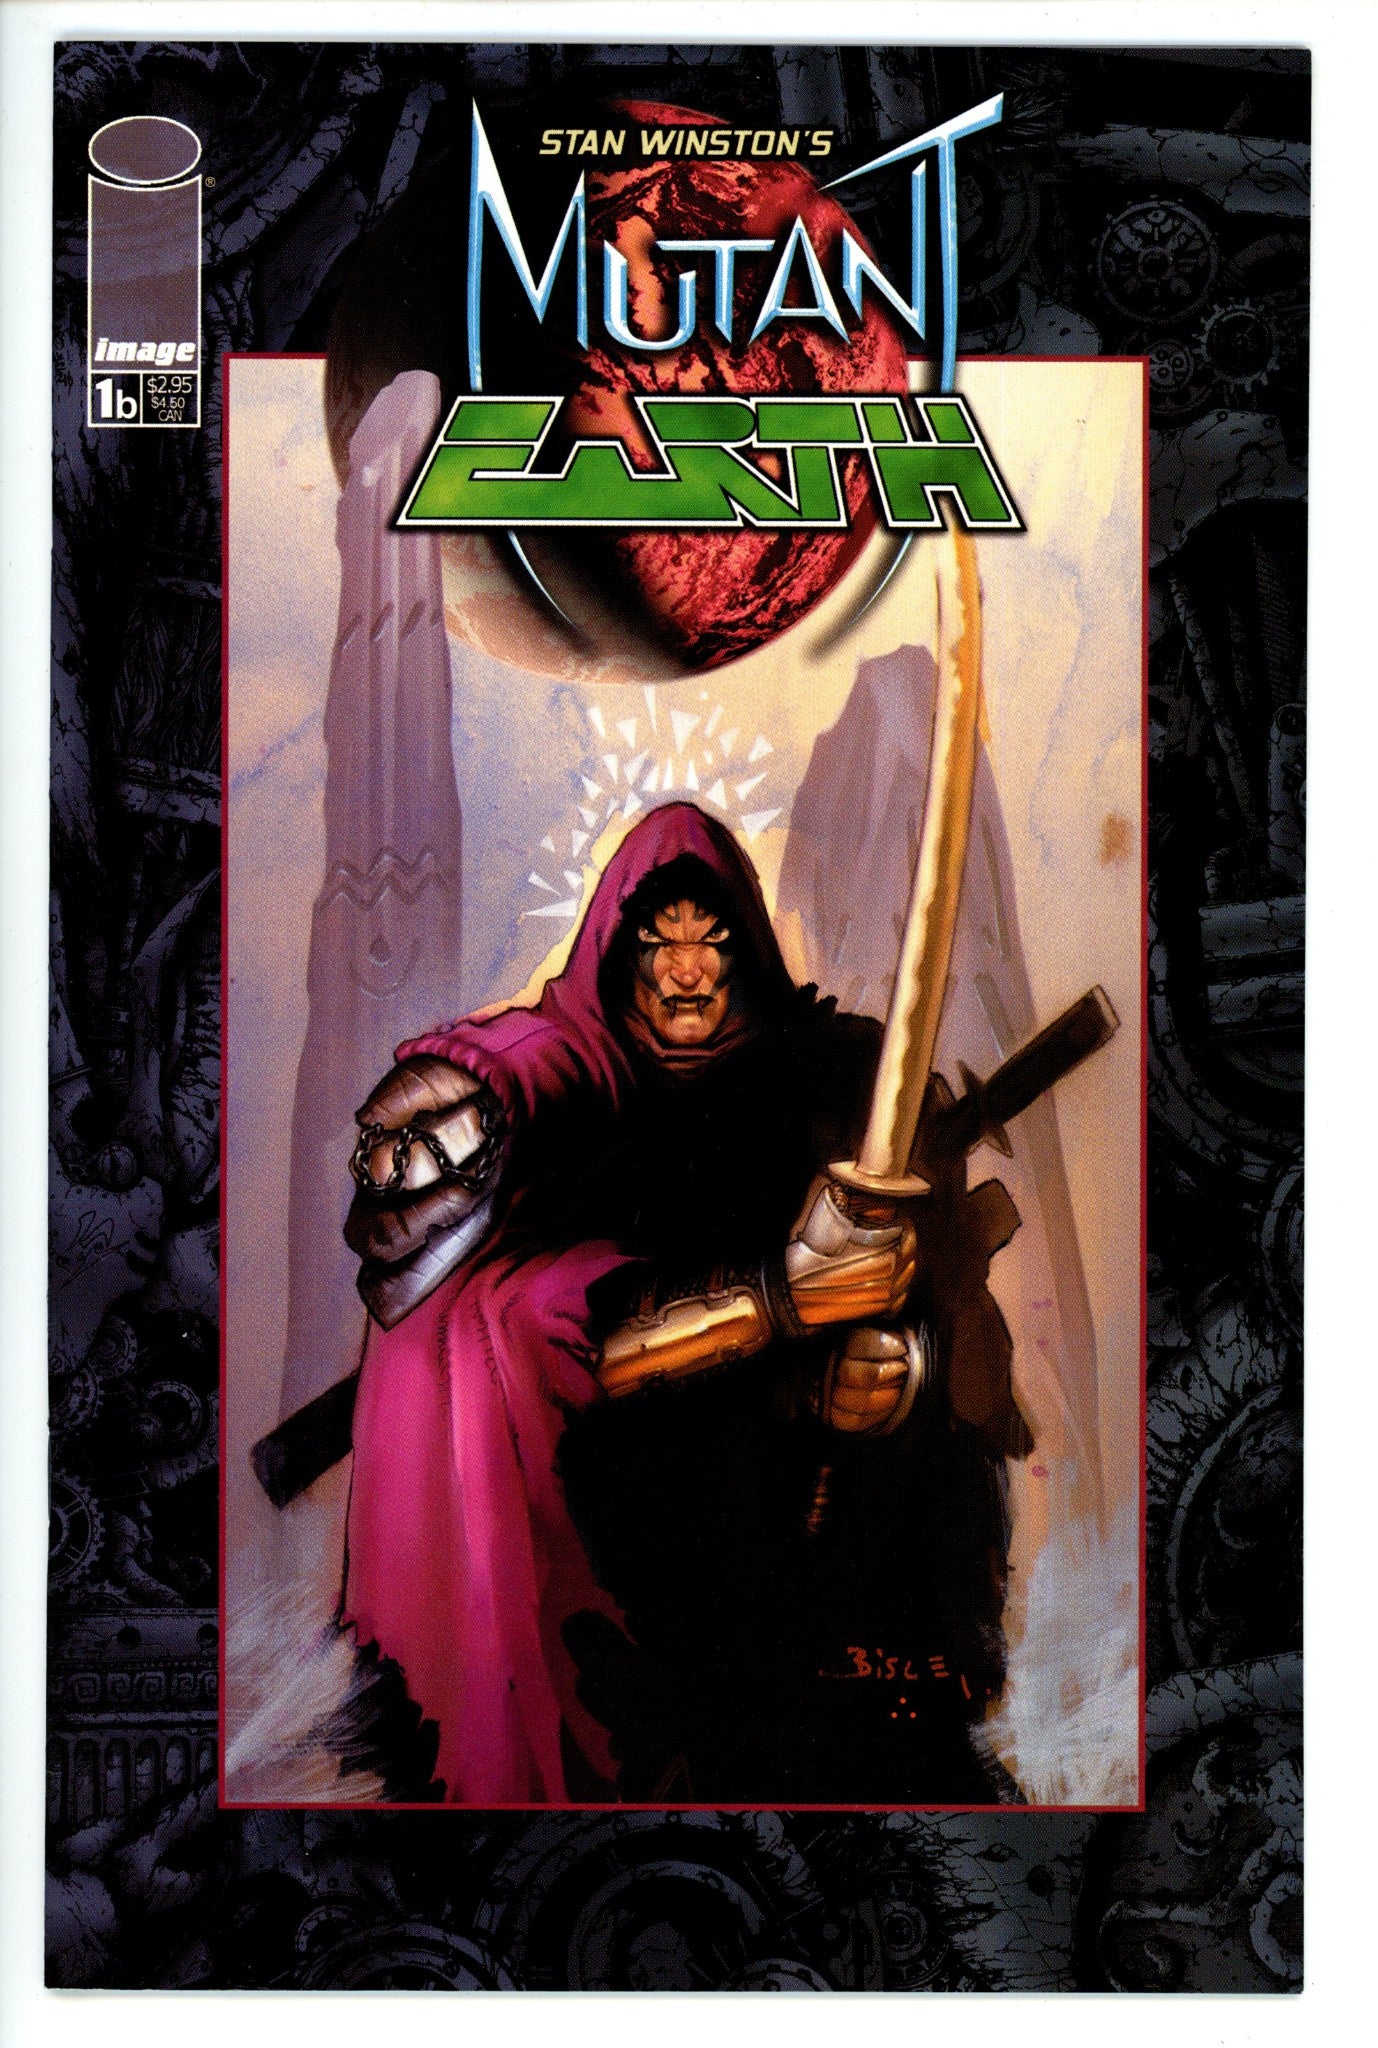 Mutant Earth / Realm of the Claw 1 Bisley Variant